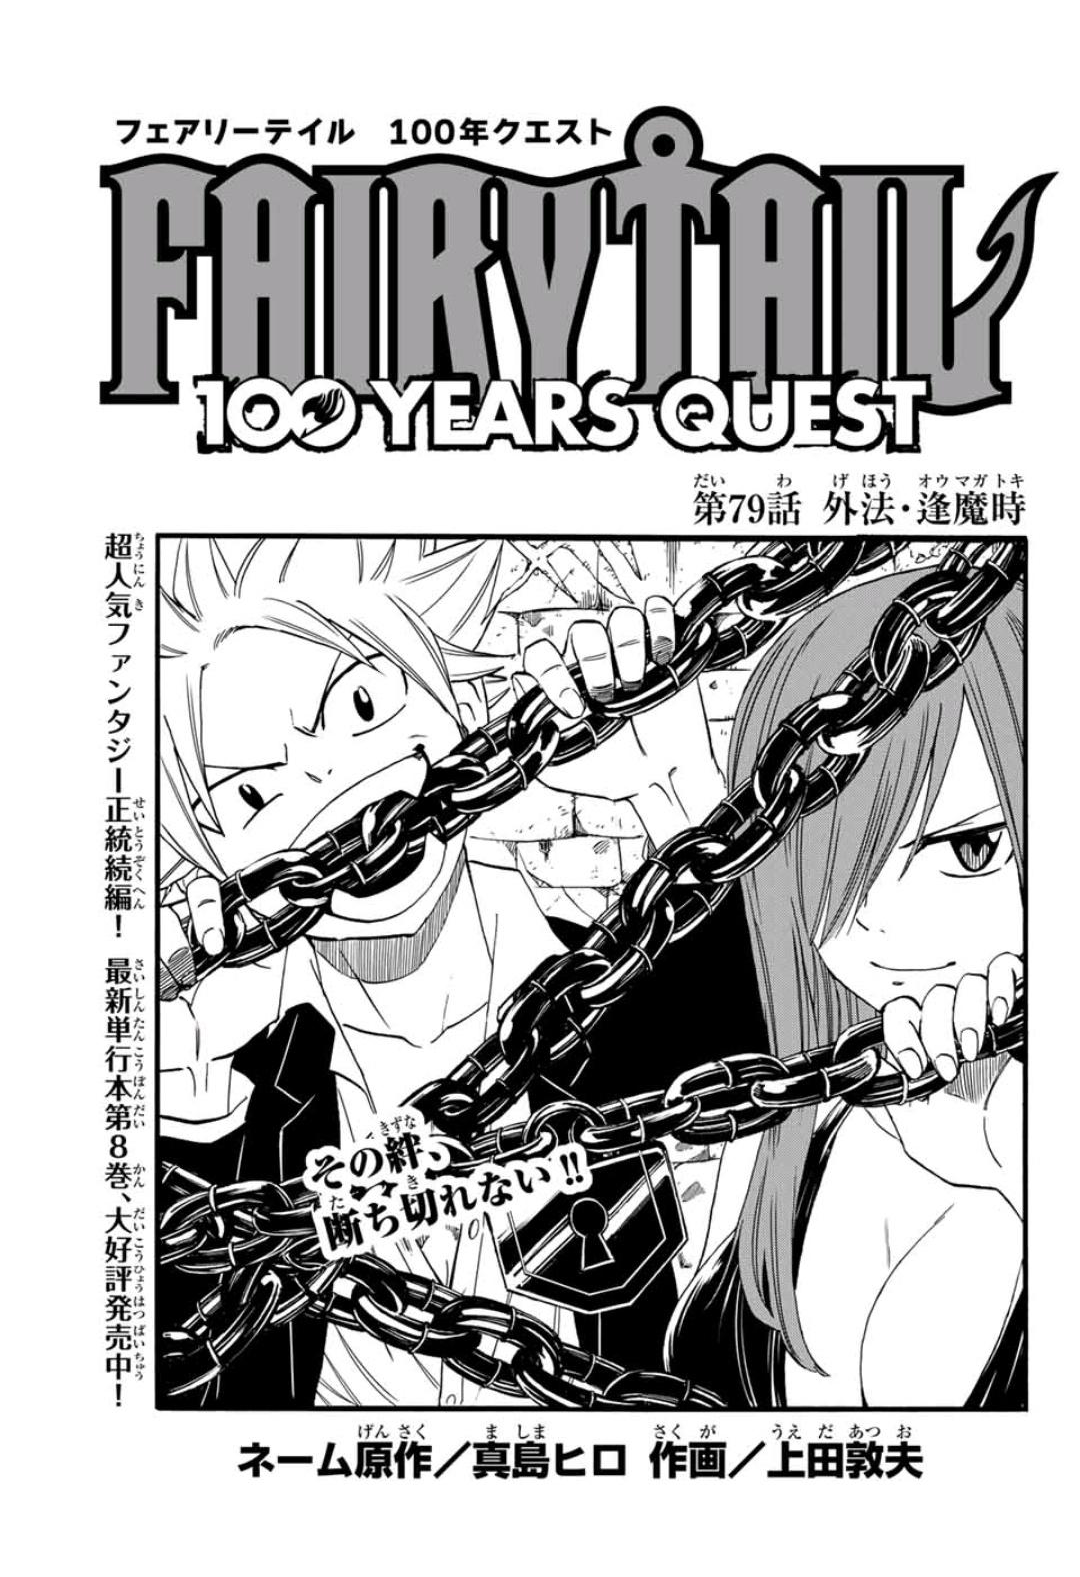 Fairy Tail: 100 Years Quest Chapter 79 | Fairy Tail Wiki | Fandom